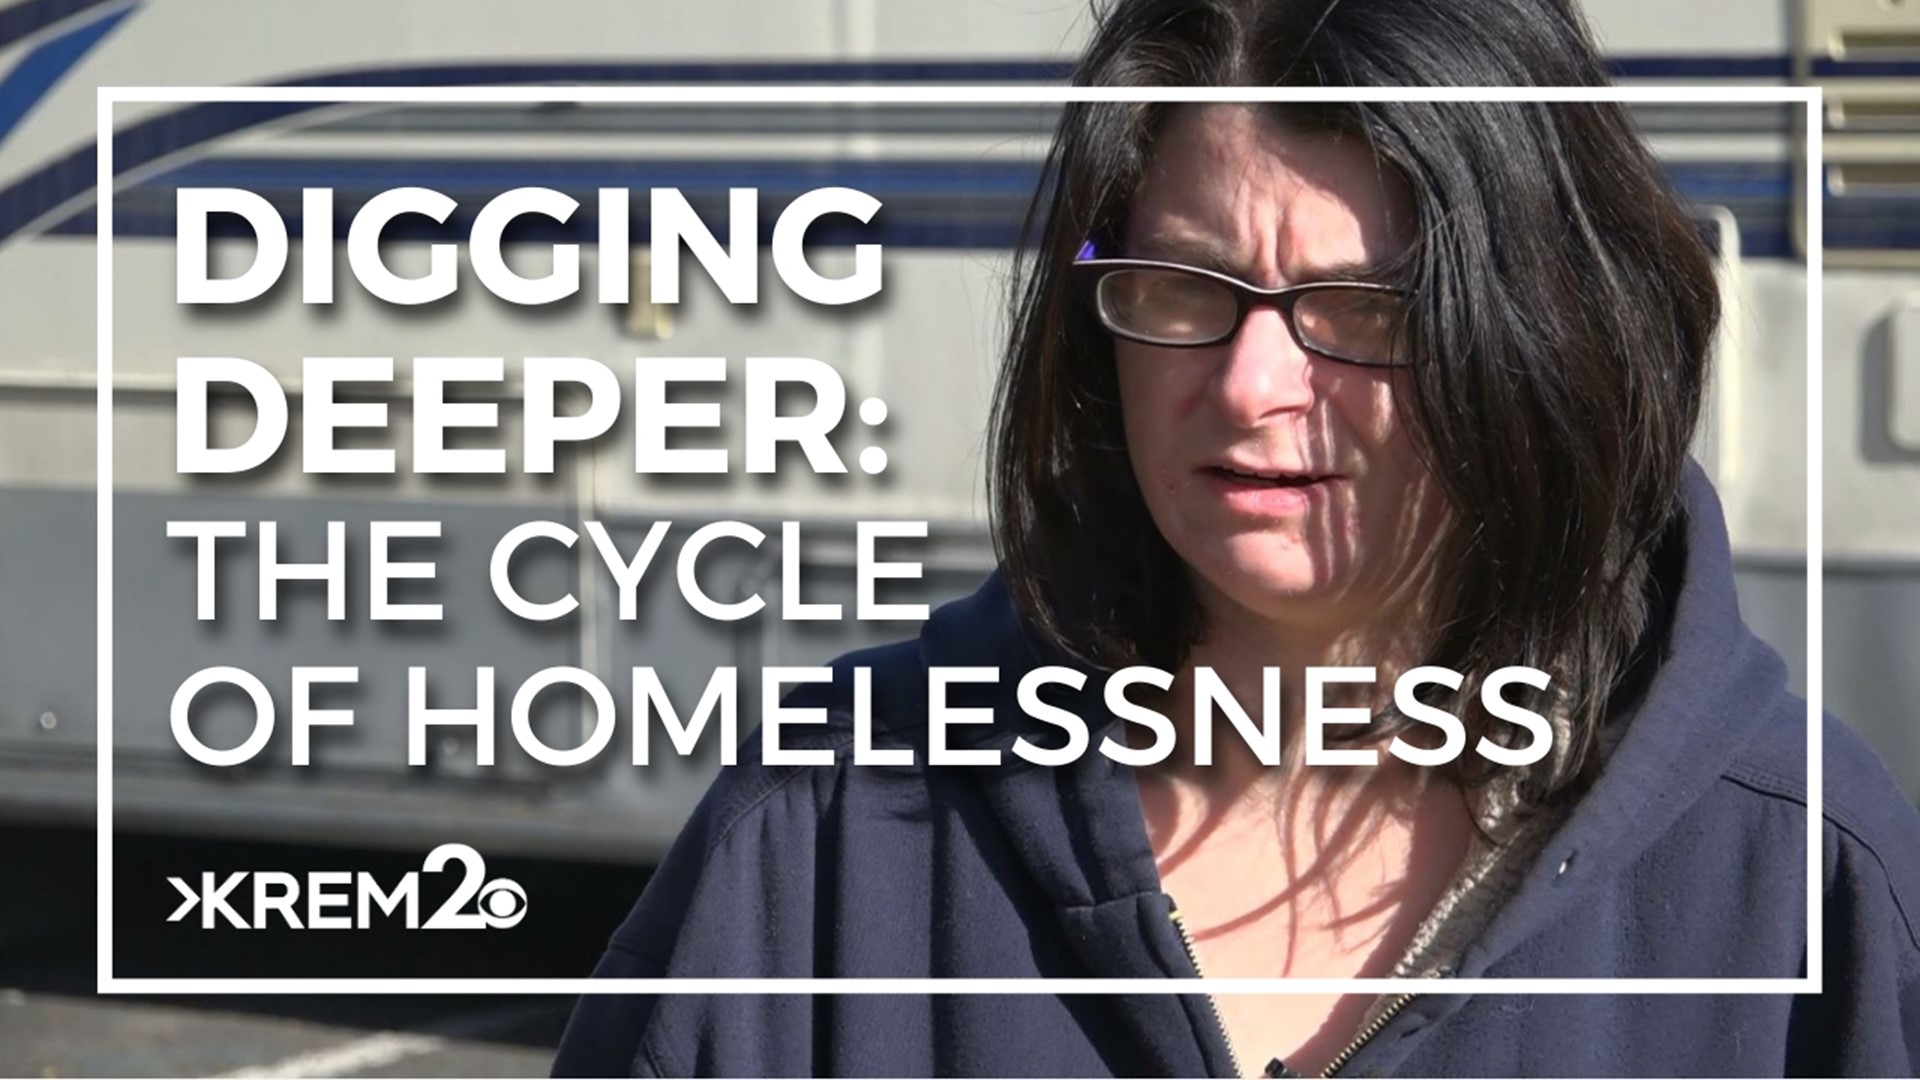 Joelle Fitzpatrick has been homeless since Summer 2022. She stayed at the I-90 homeless encampment, transitioned to Catalyst and is now back living out of her RV.